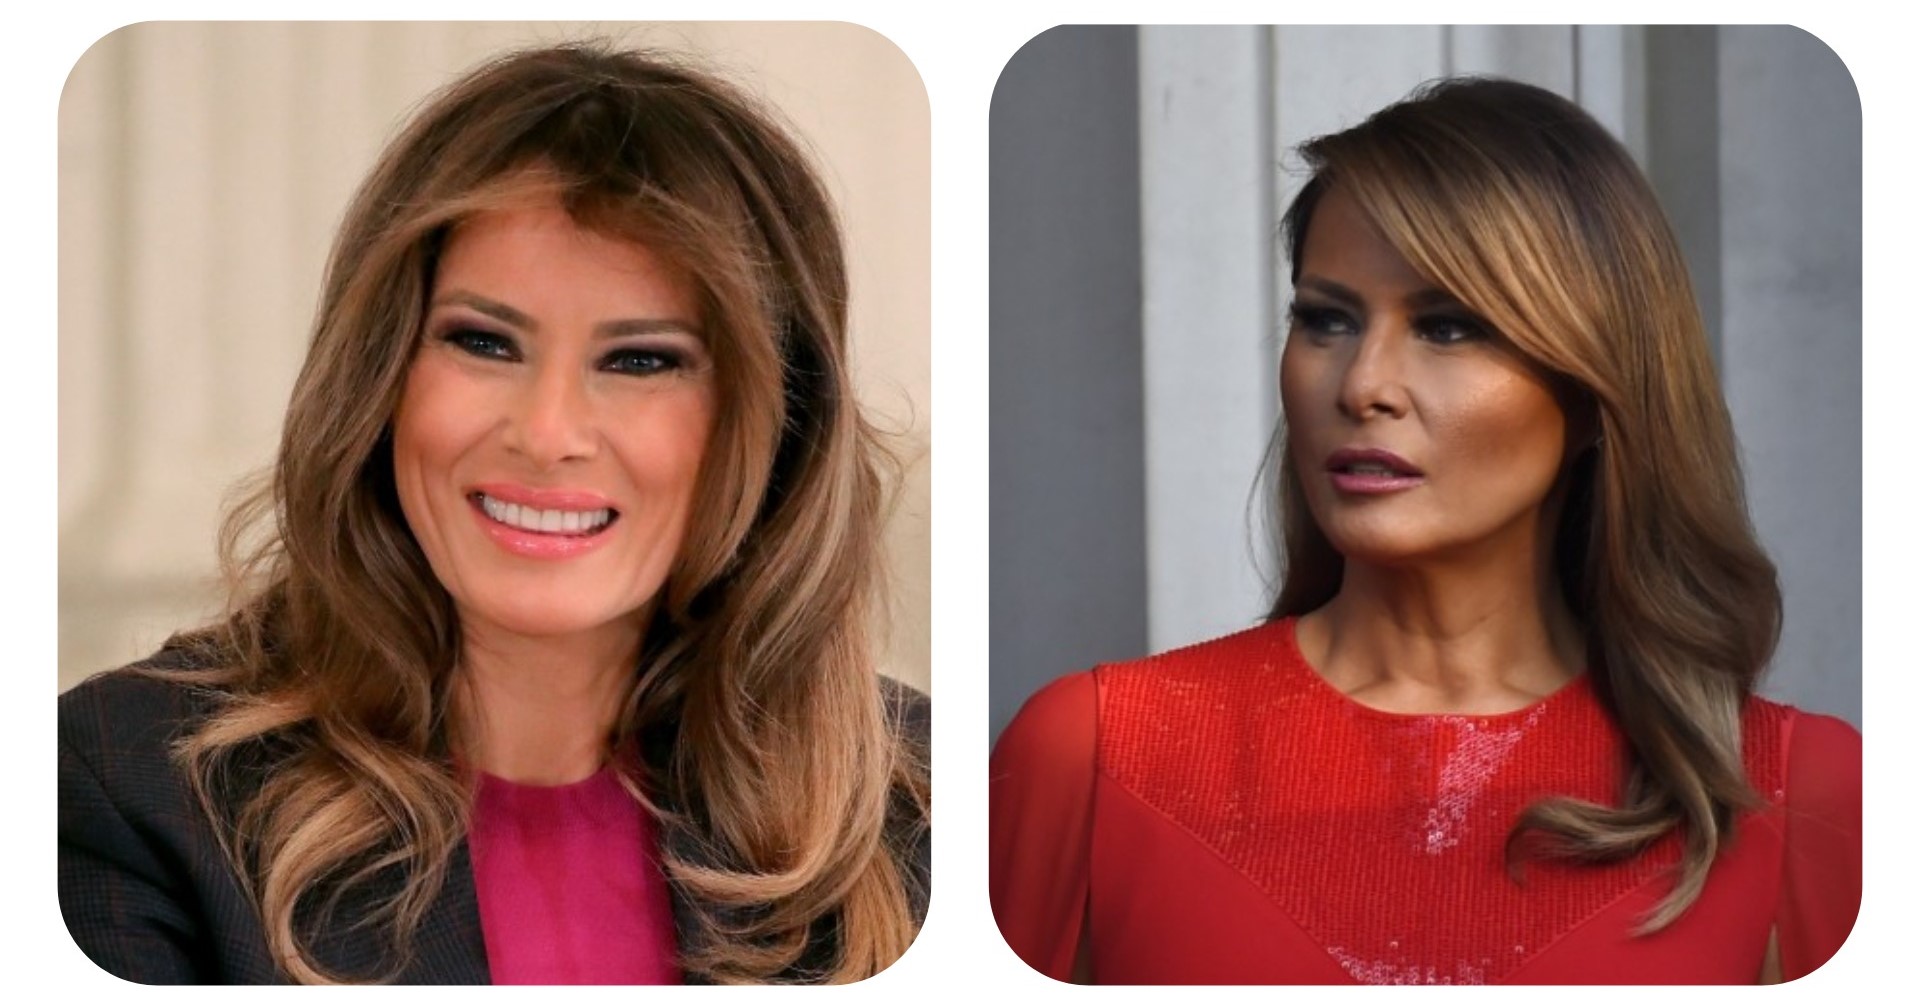 Melania Trump allegedly had a plastic surgery makeover